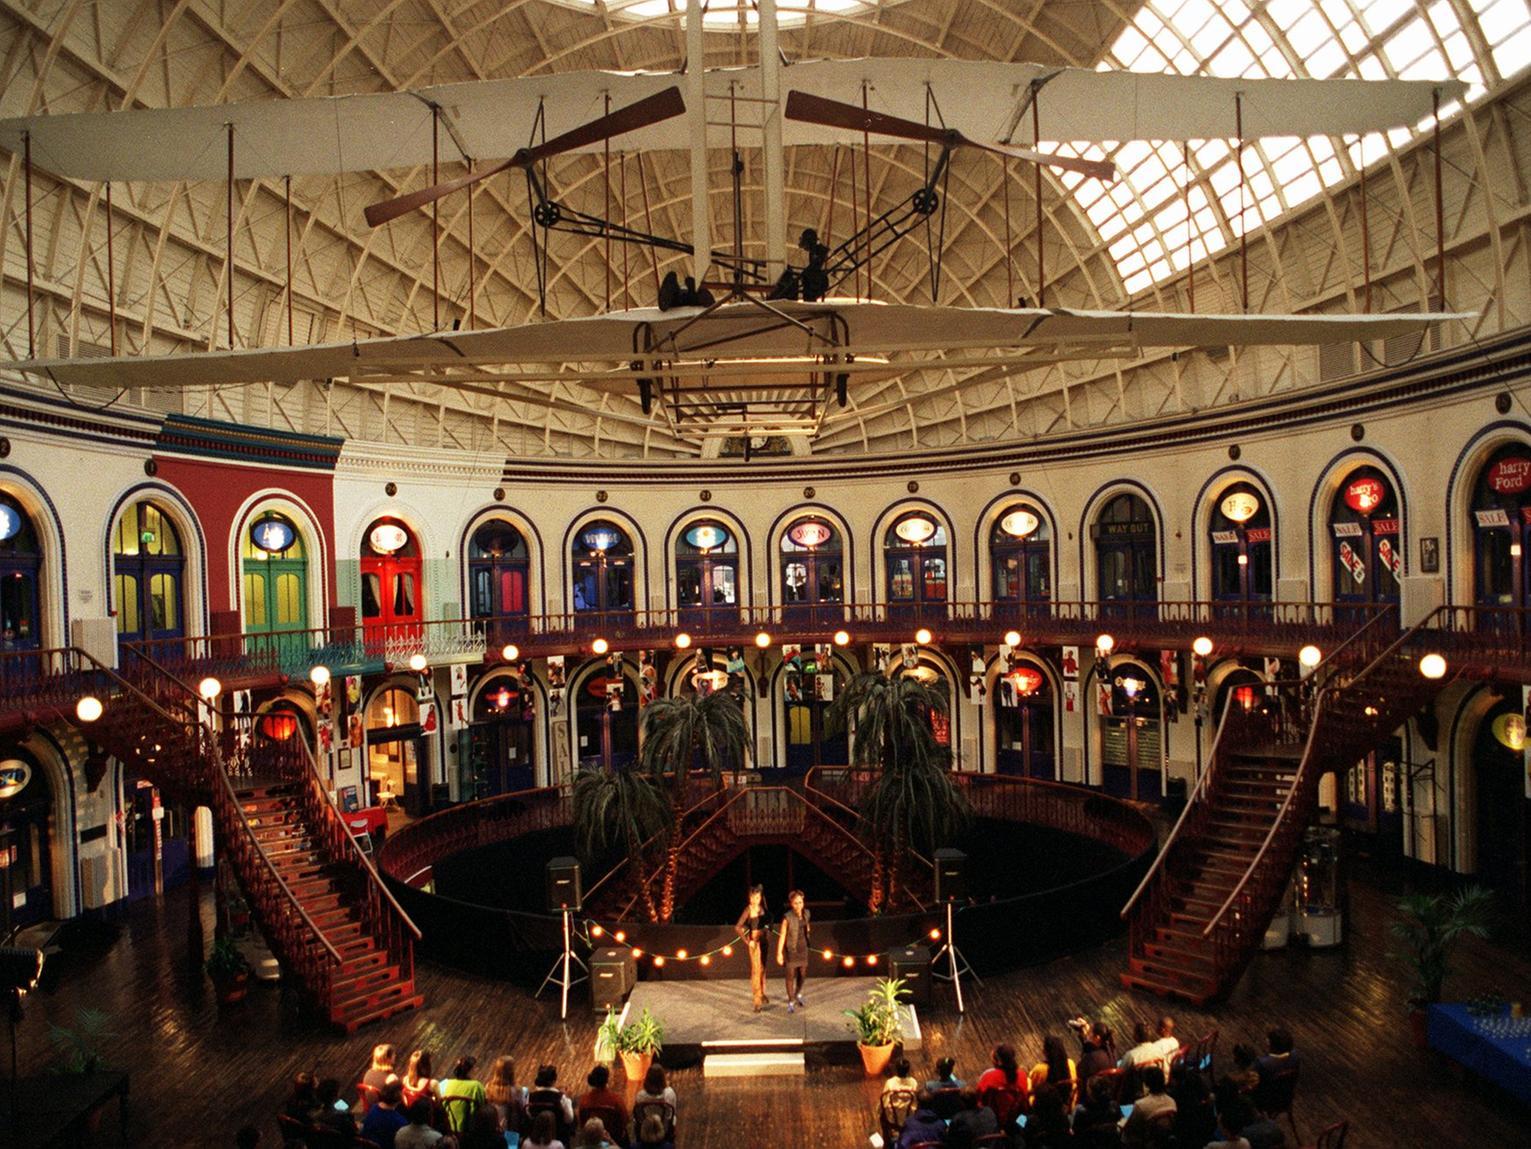 Do you remember when the Corn Exchange hosted the Leeds to the Millennium Fashion Show?